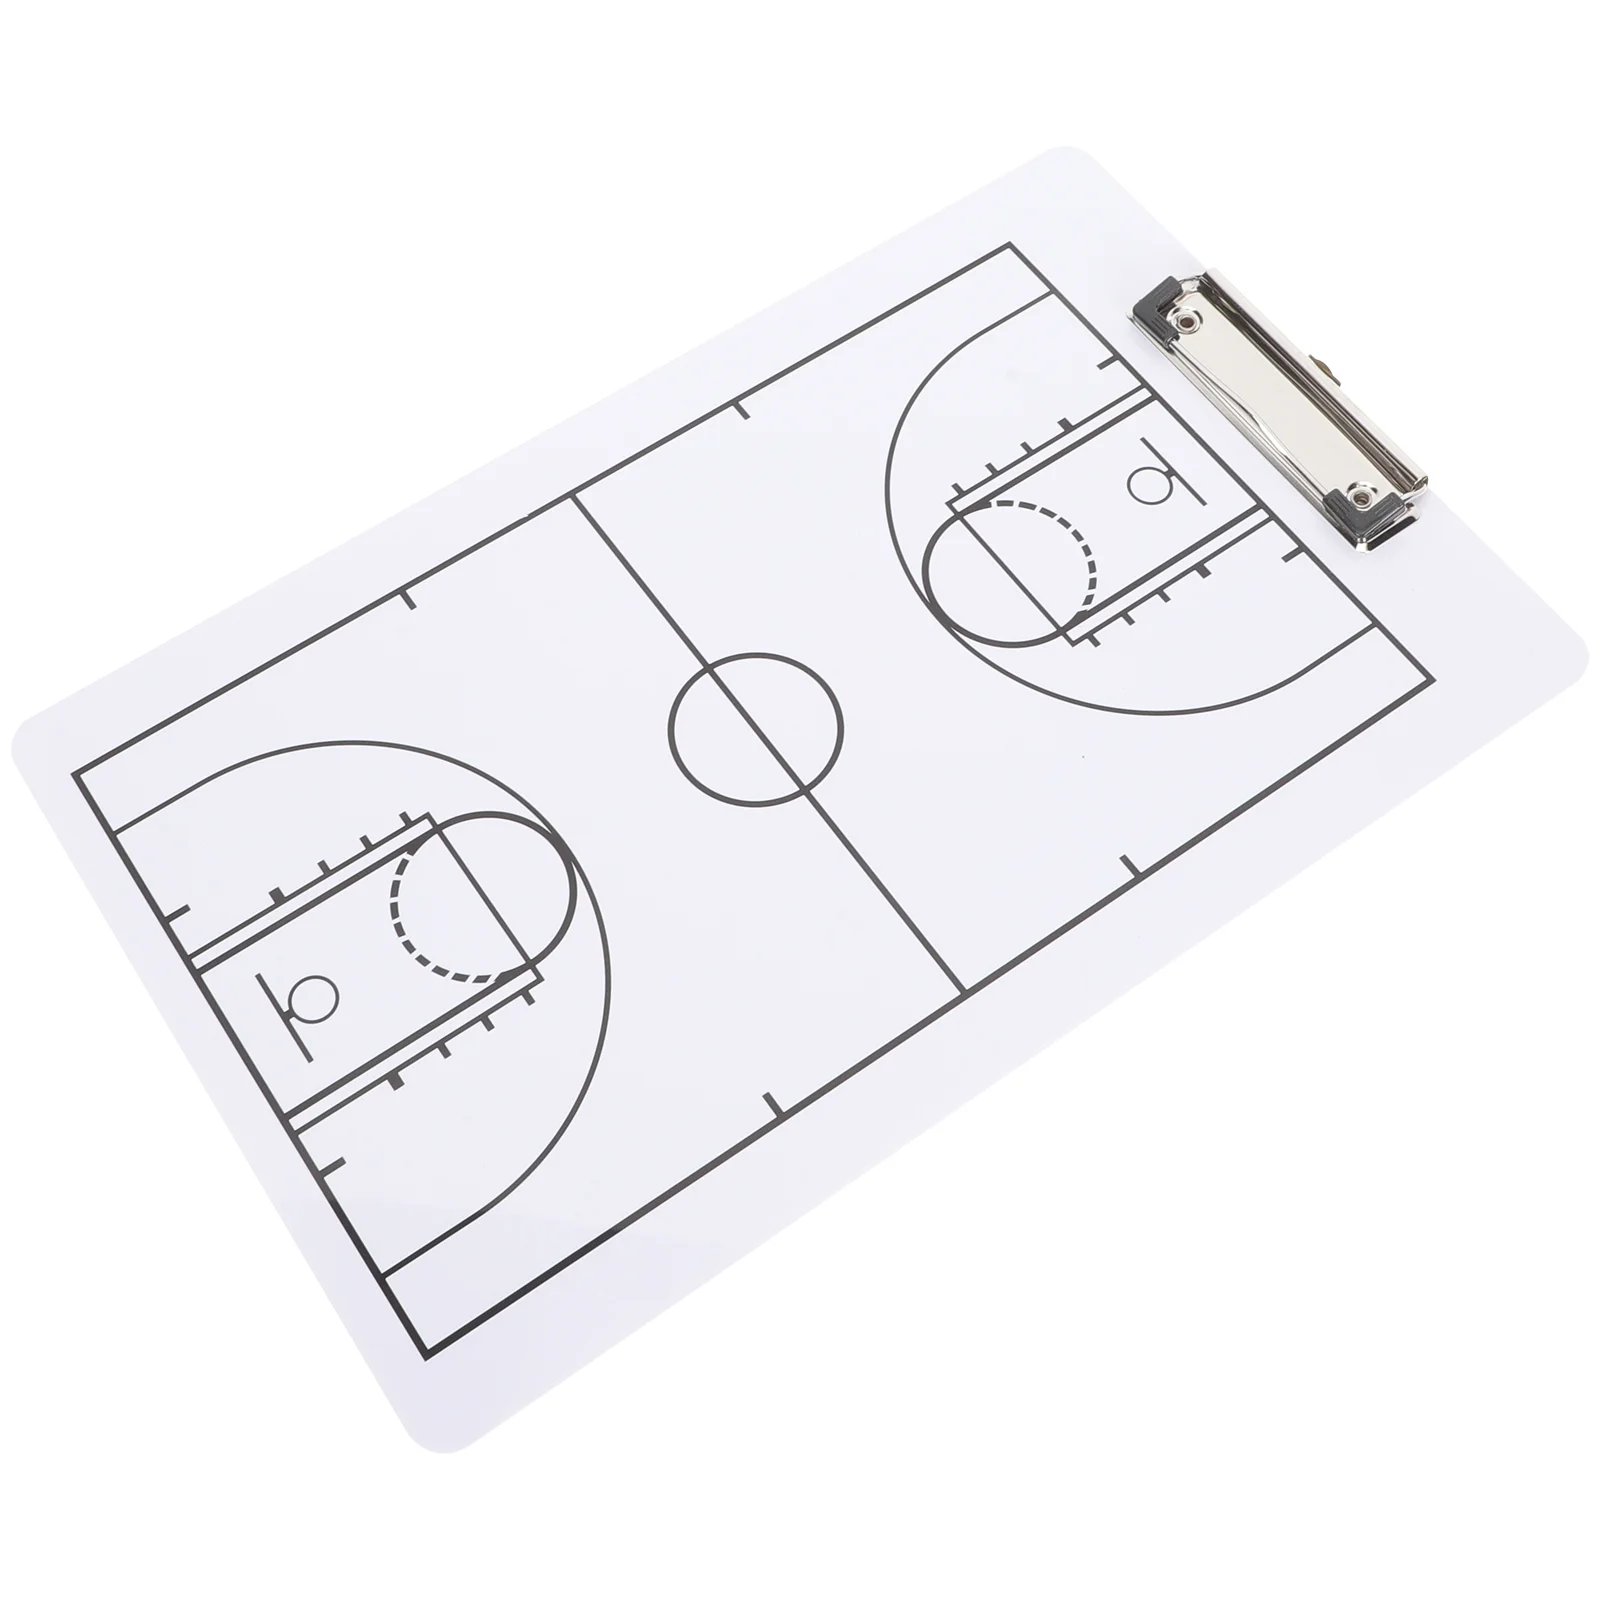 

Basketball Board Planning Training Competition Drainage Magnetic Writing Pvc Useful Match Creative